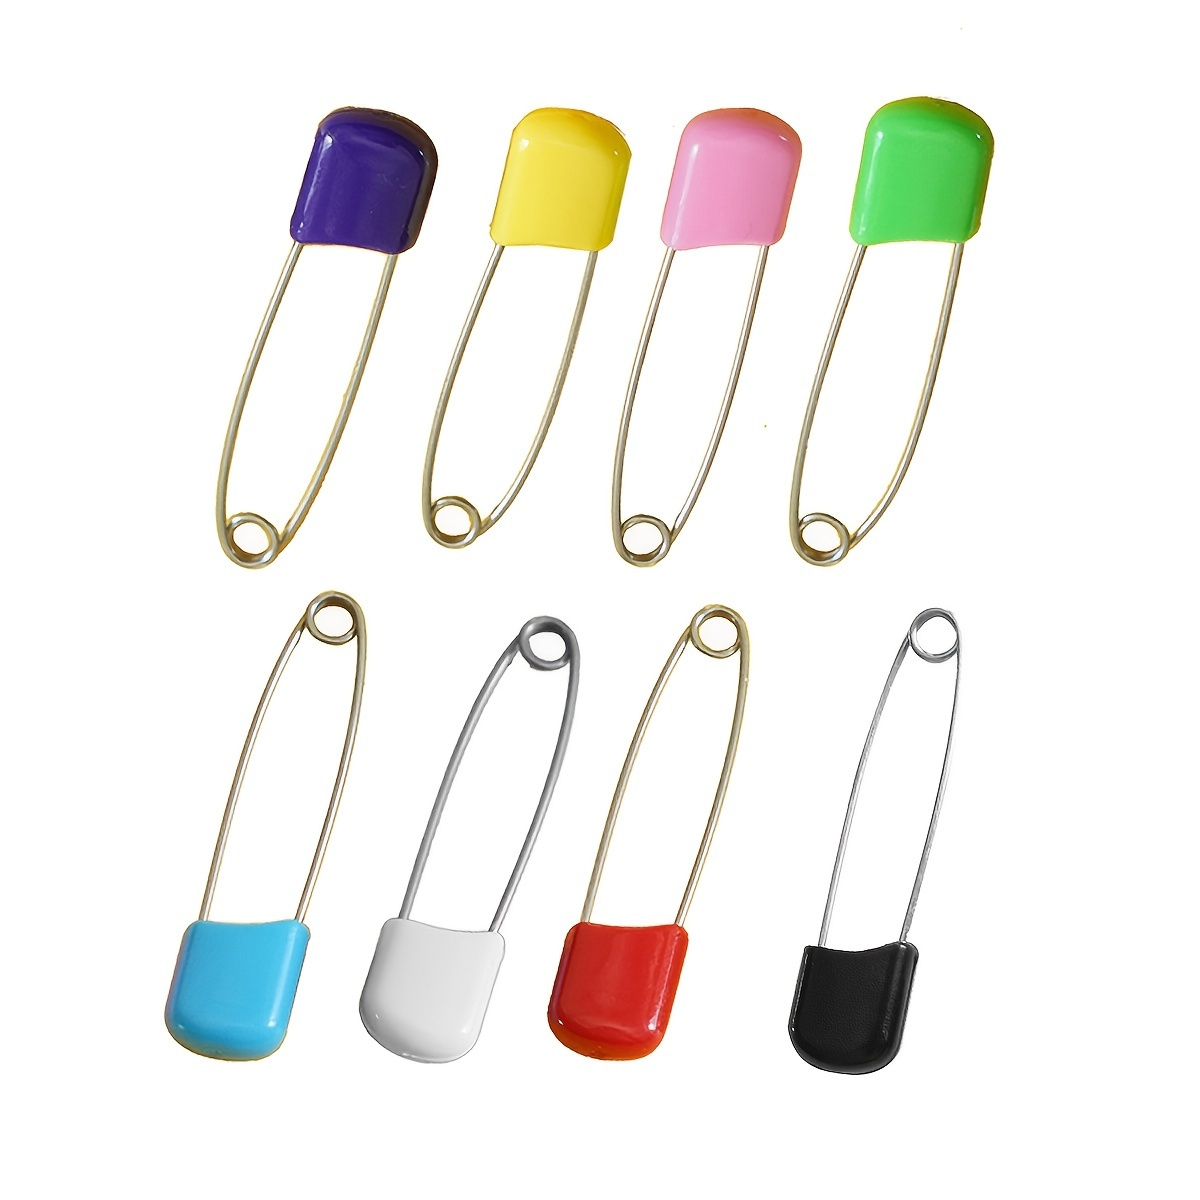 Baby Diaper Pins Safety Pin Lock Cloth Changing Locking Clip Multi Colors